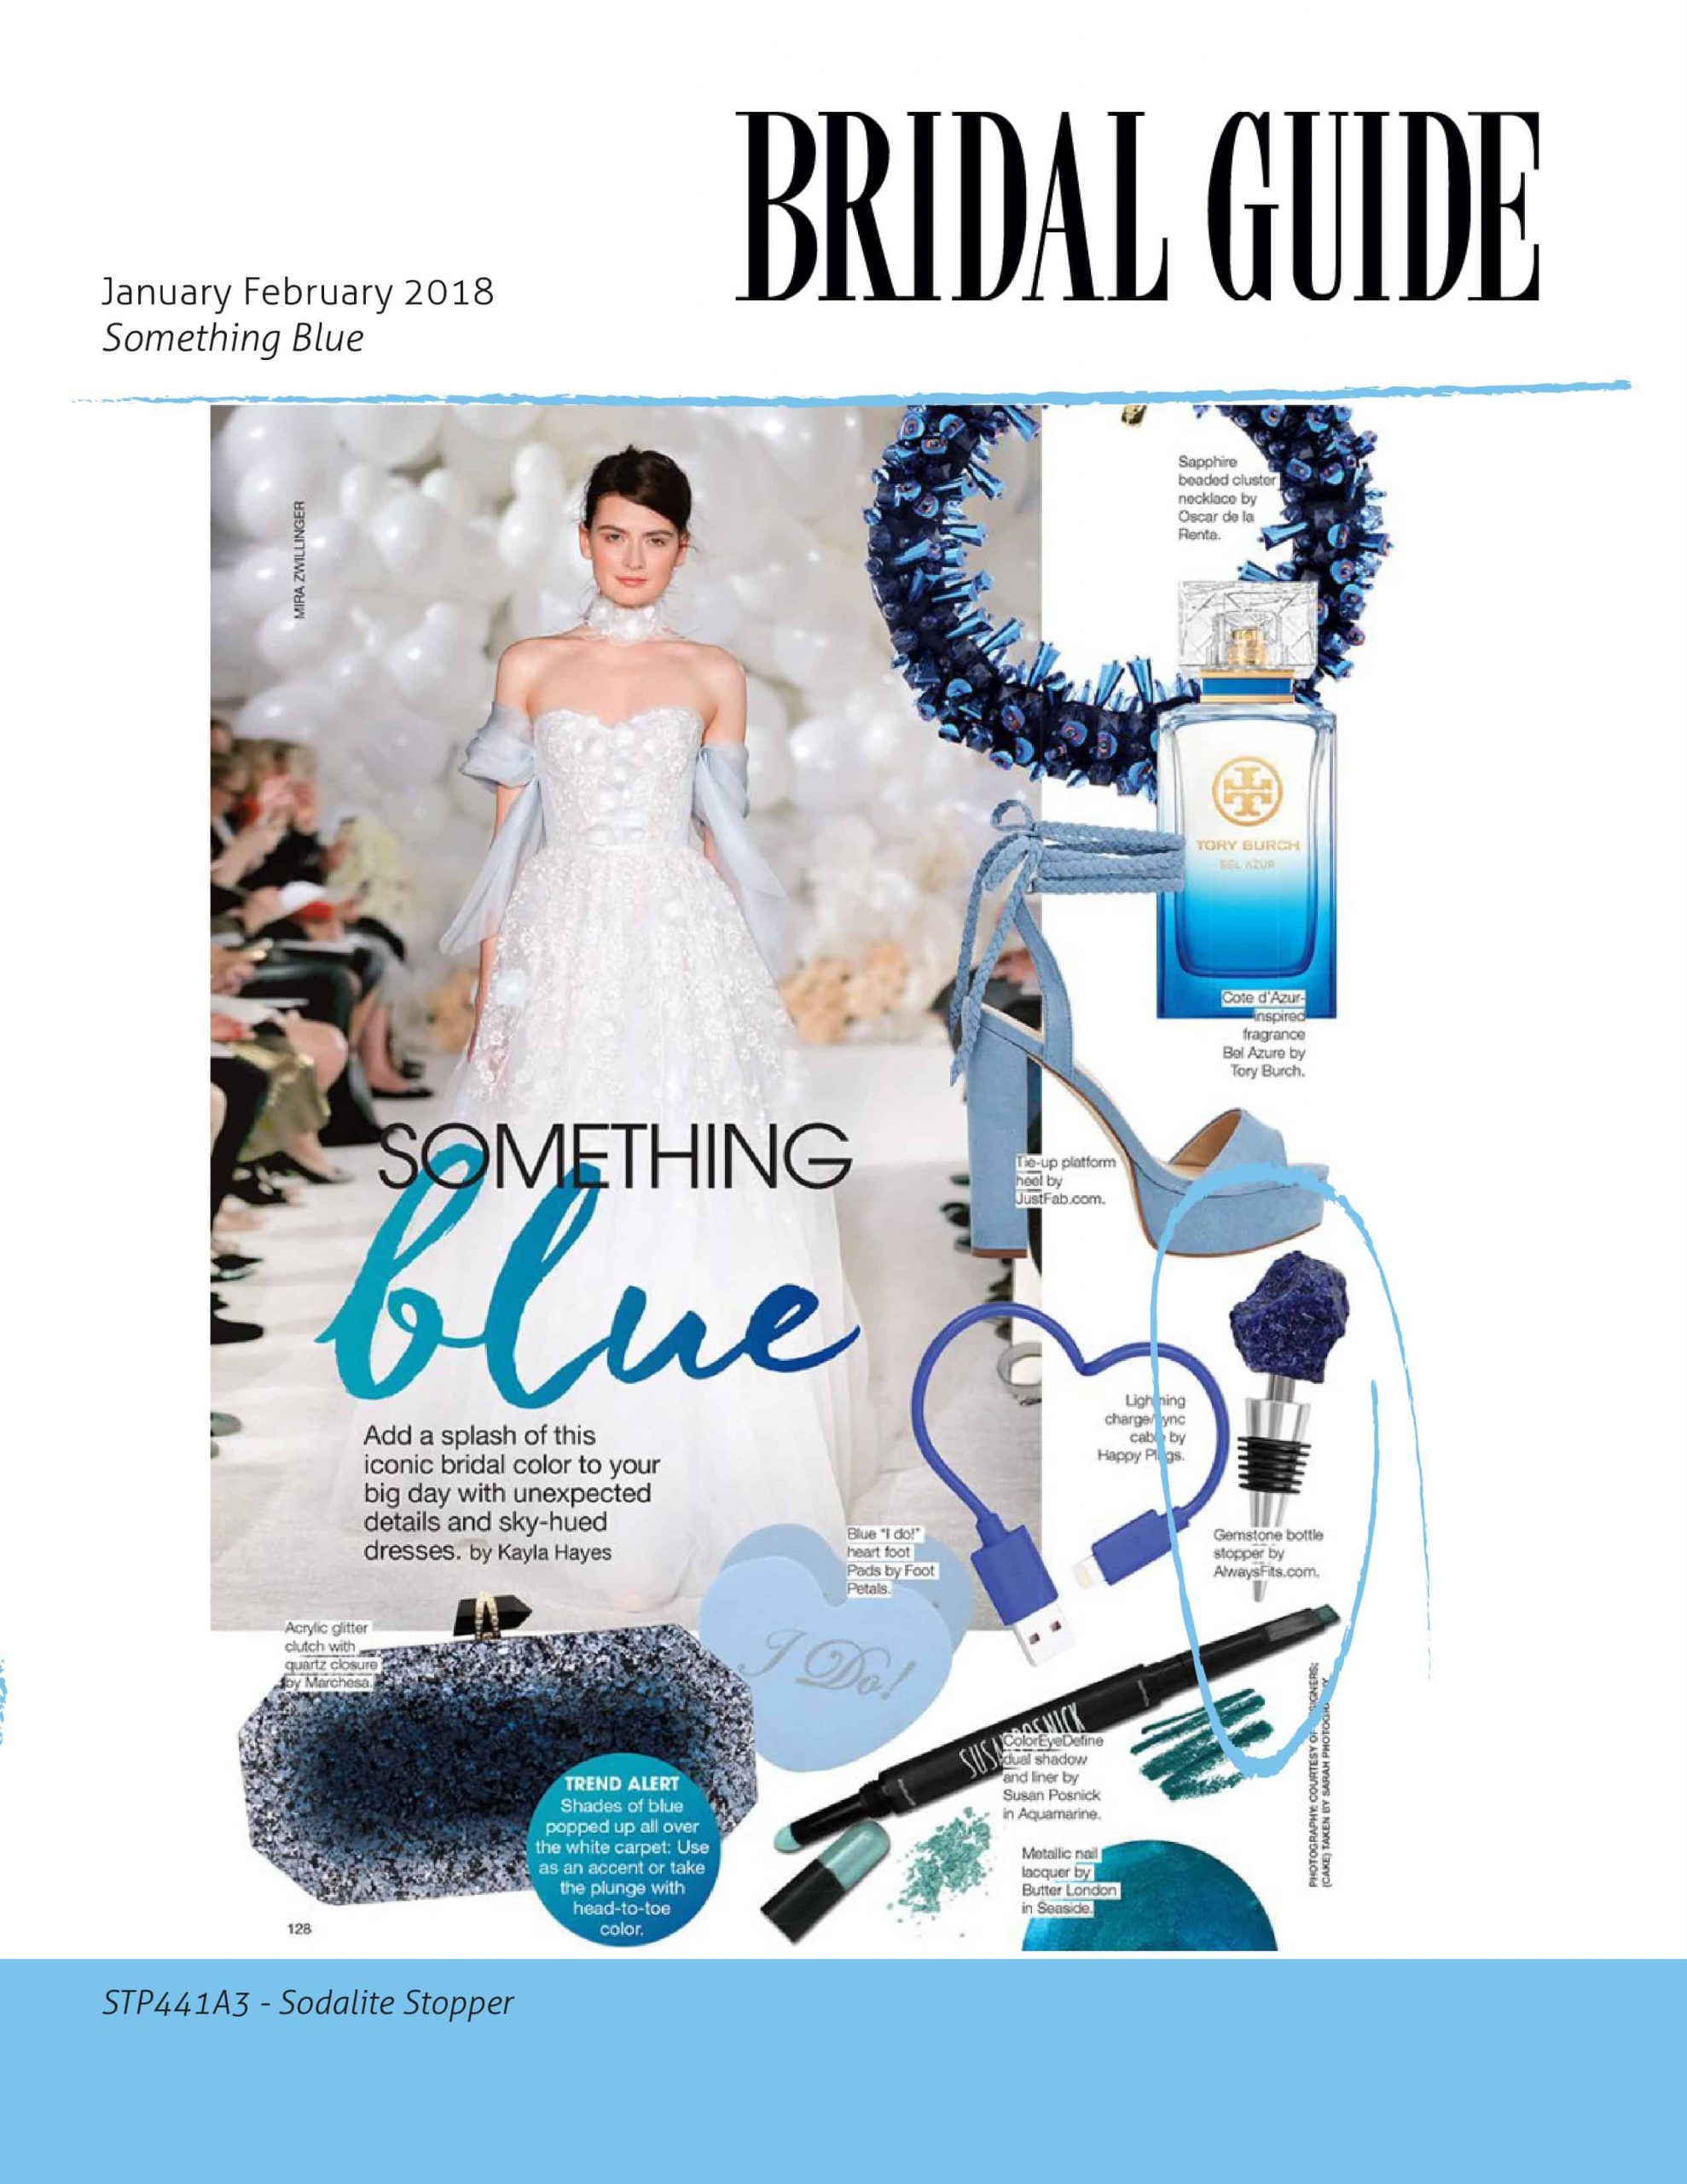 Bridal Guide January February 2018 Issue